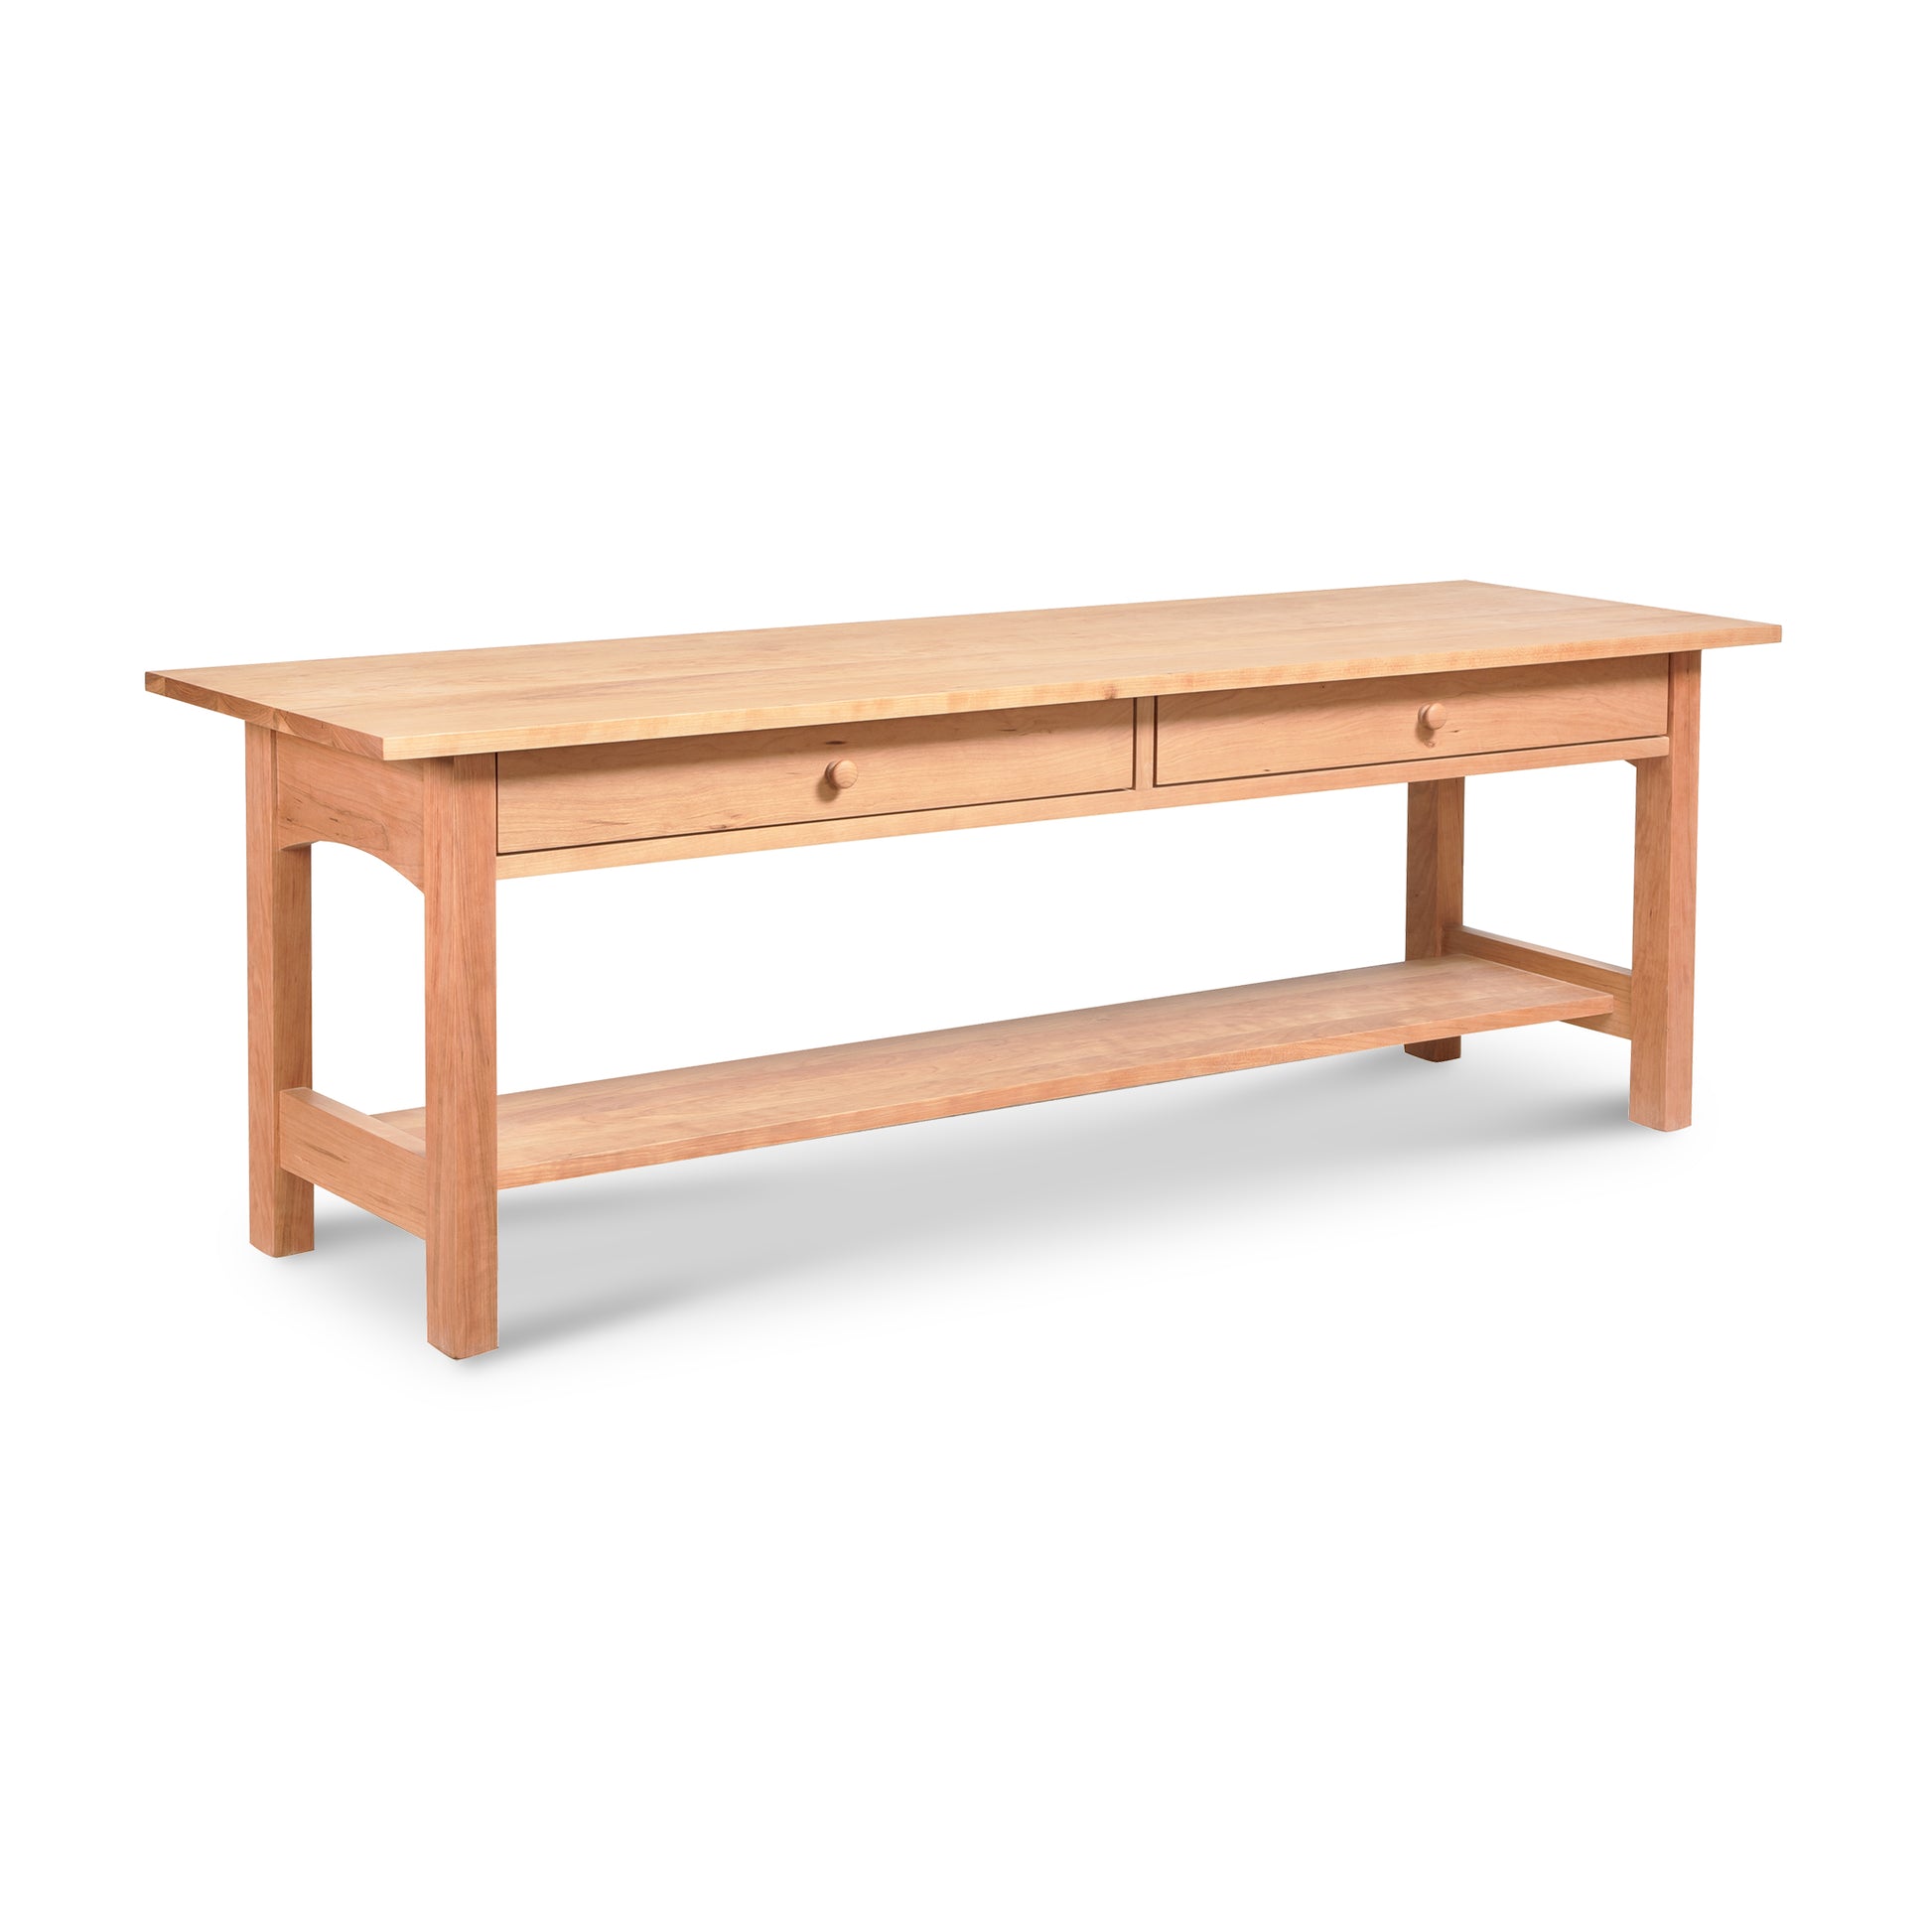 Vermont Furniture Designs Burlington Shaker 2-Drawer Coffee Table with a lower shelf, isolated on a white background.